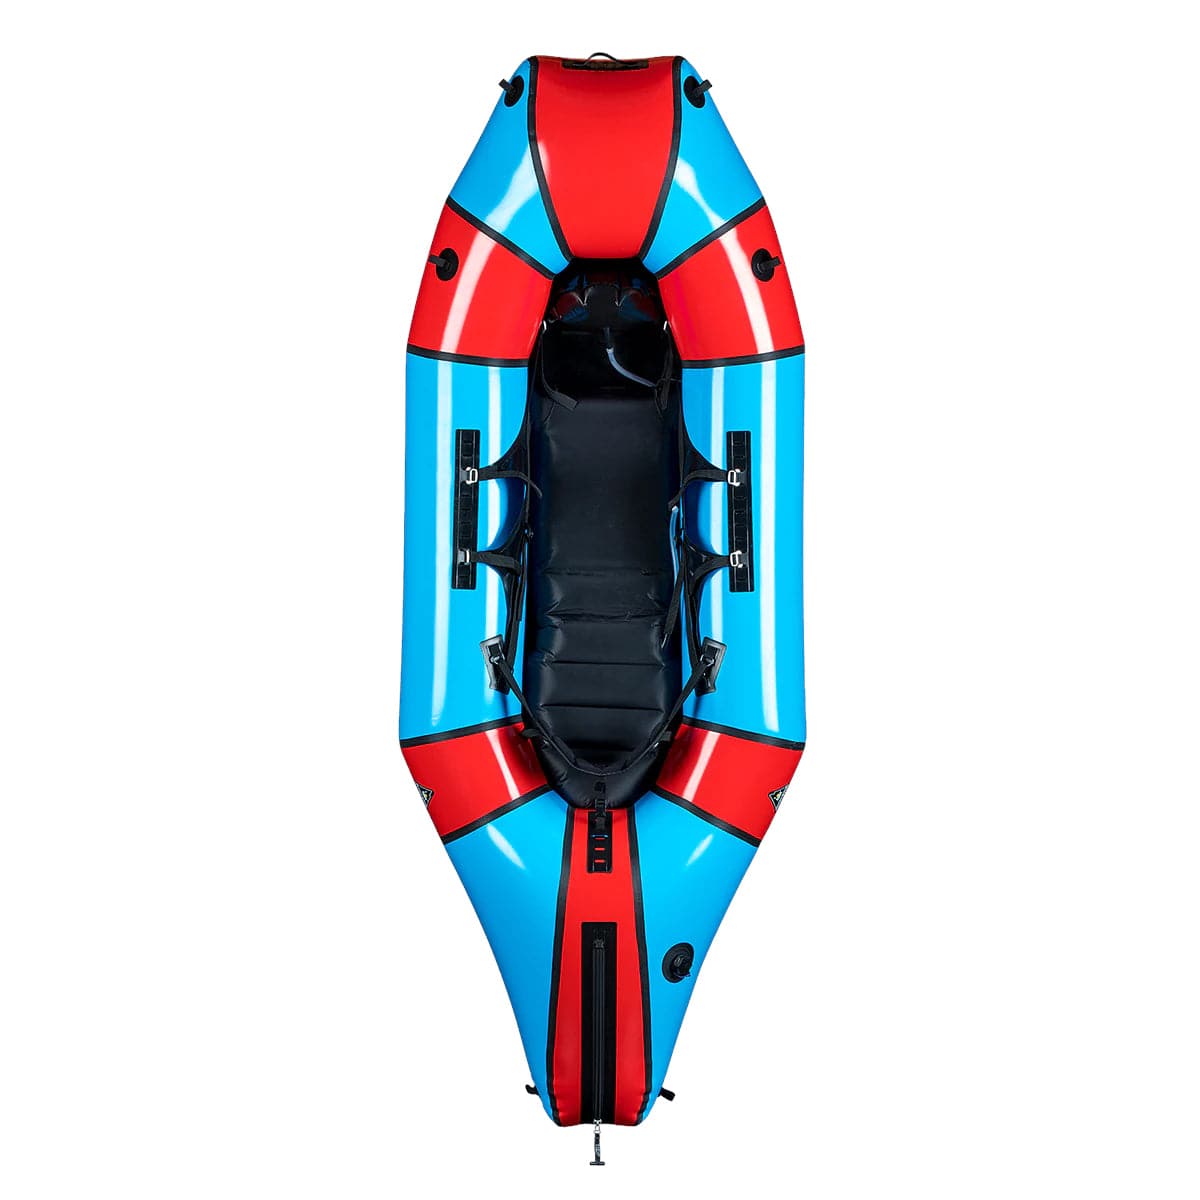 Featuring the GnarMule pack raft, pack rafting manufactured by Alpacka shown here from a fourth angle.